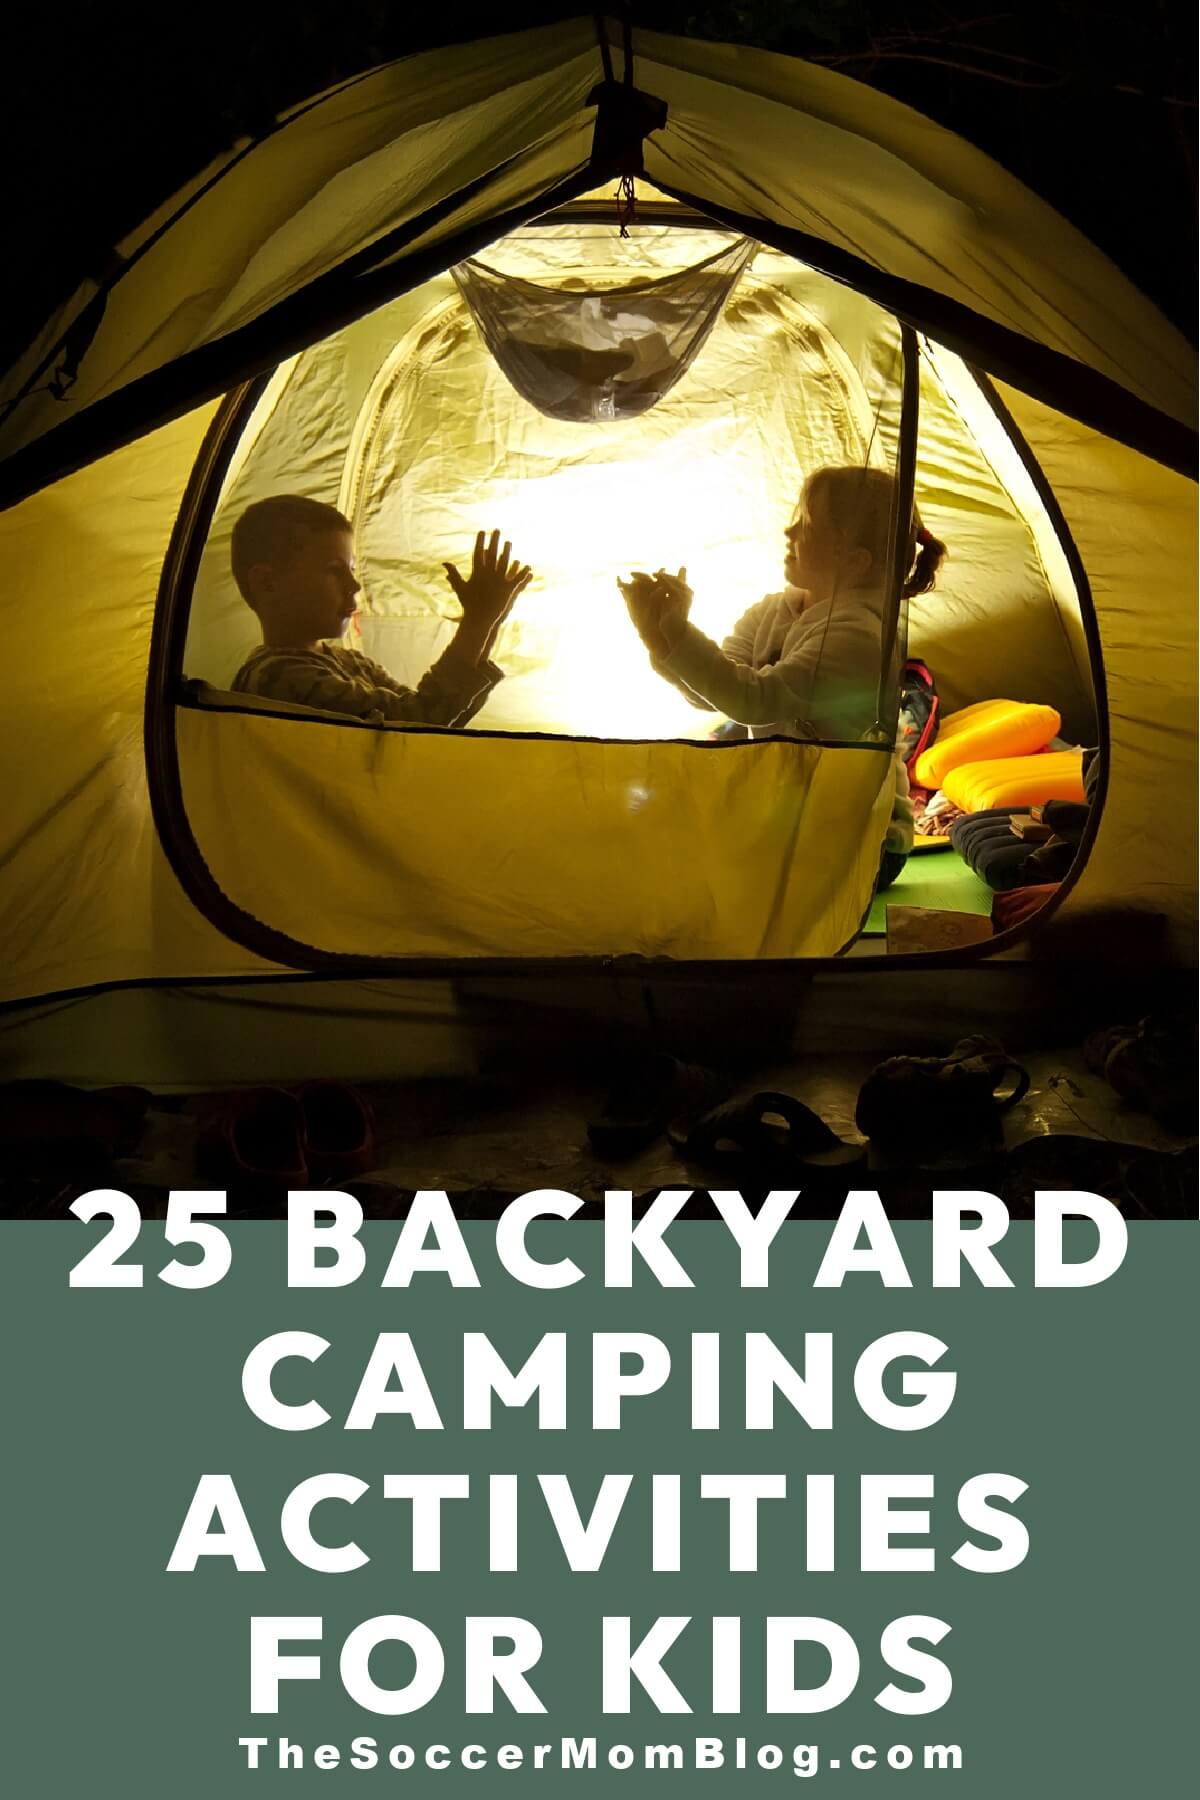 kids in a tent at night; text overlay "25 Backyard Camping Activities For Kids"